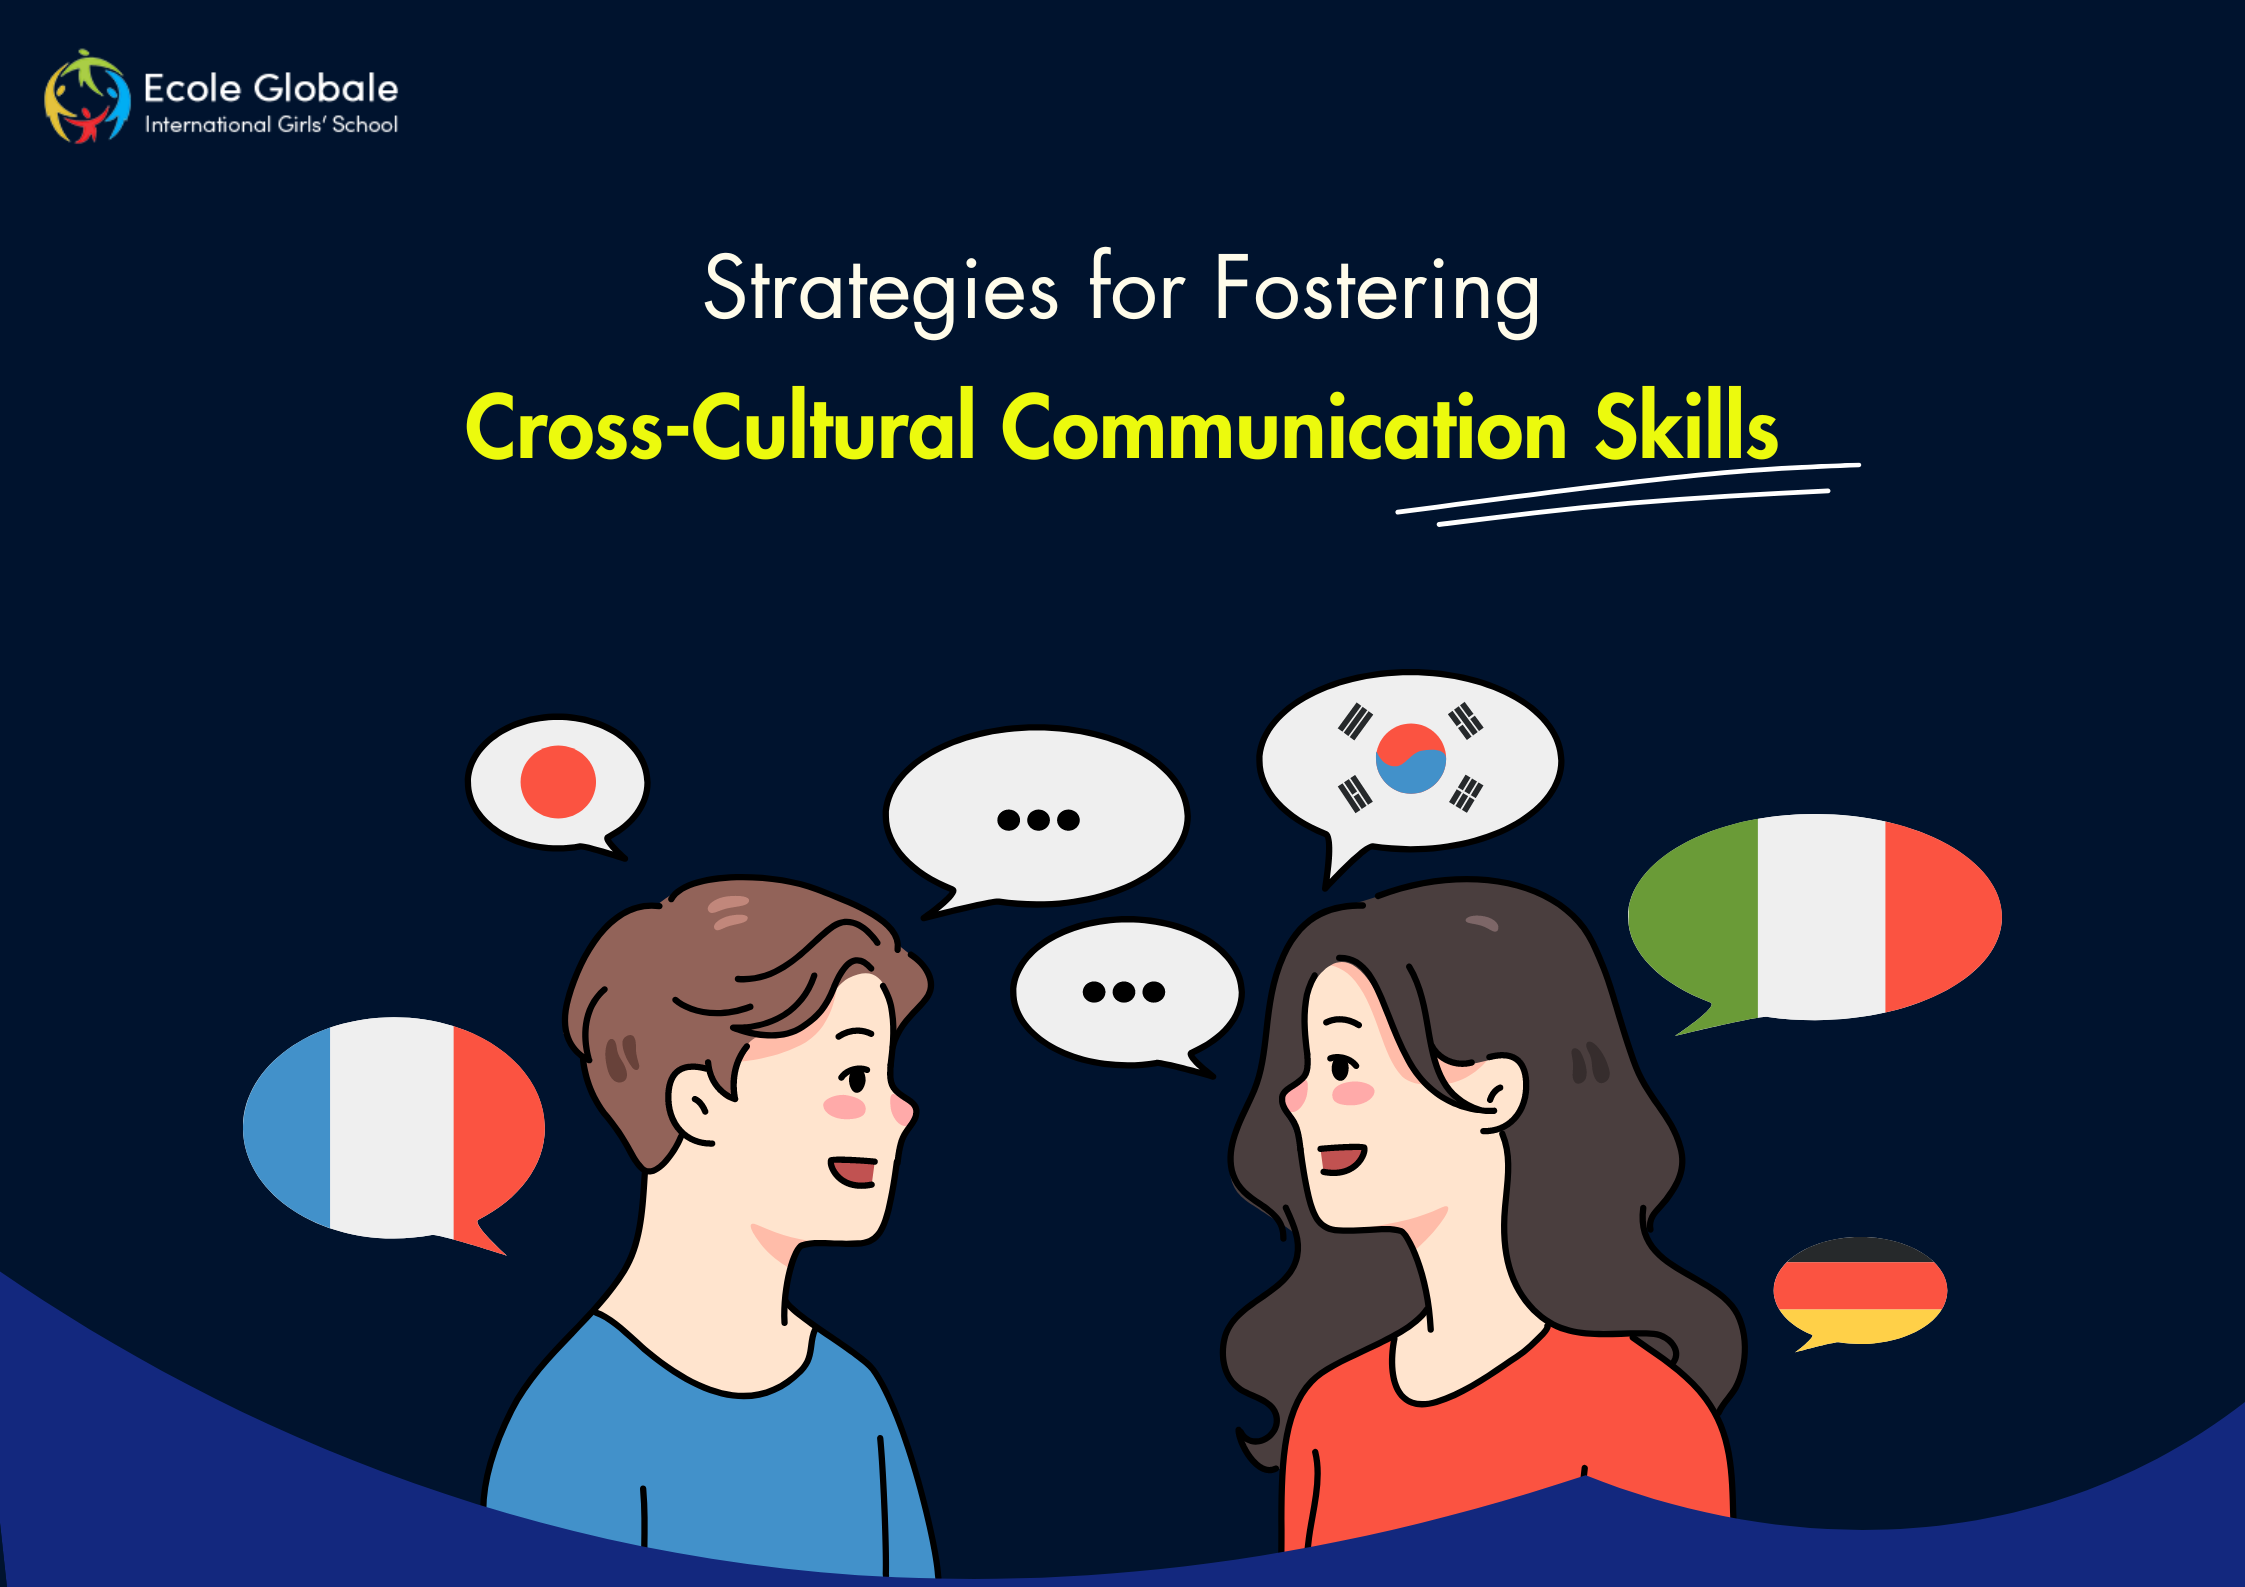 You are currently viewing Ecole Globale’s Strategies for Fostering Cross-Cultural Communication Skills